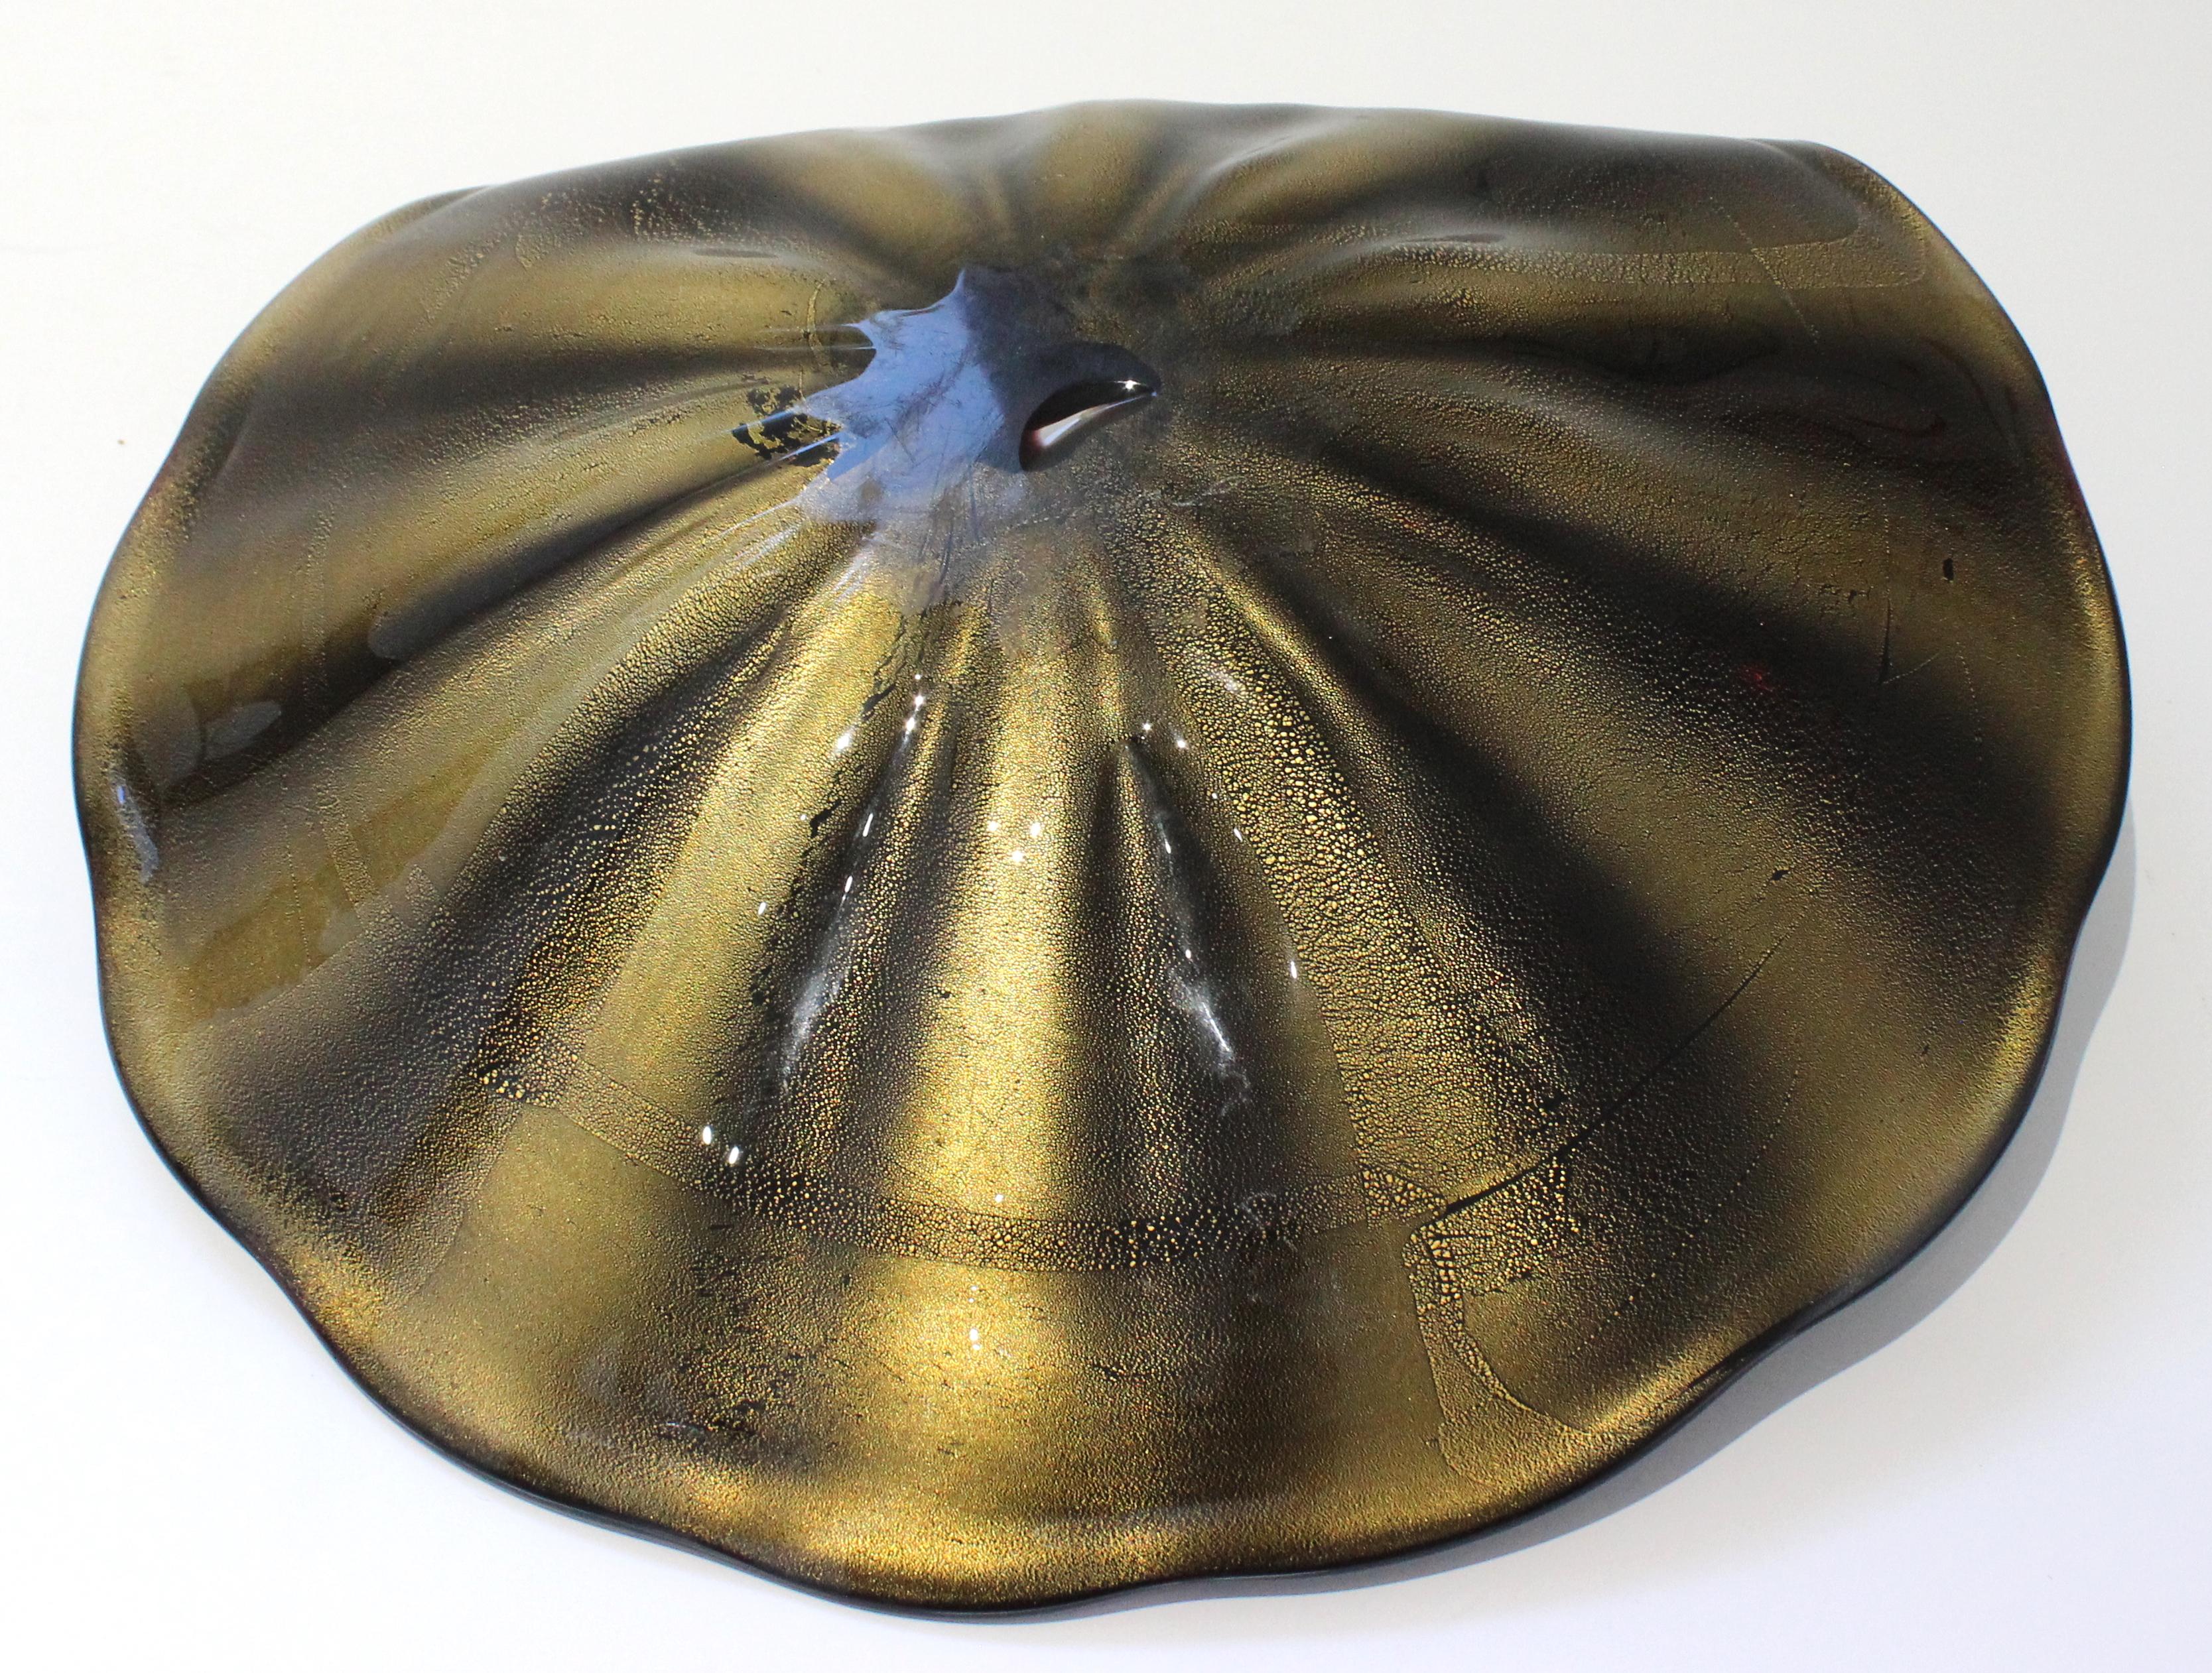 This stylish and chic Murano glass clamshell with a pearl was created by Licio Zanetti and it will make a definite statement with its form and use of gold and black coloration.